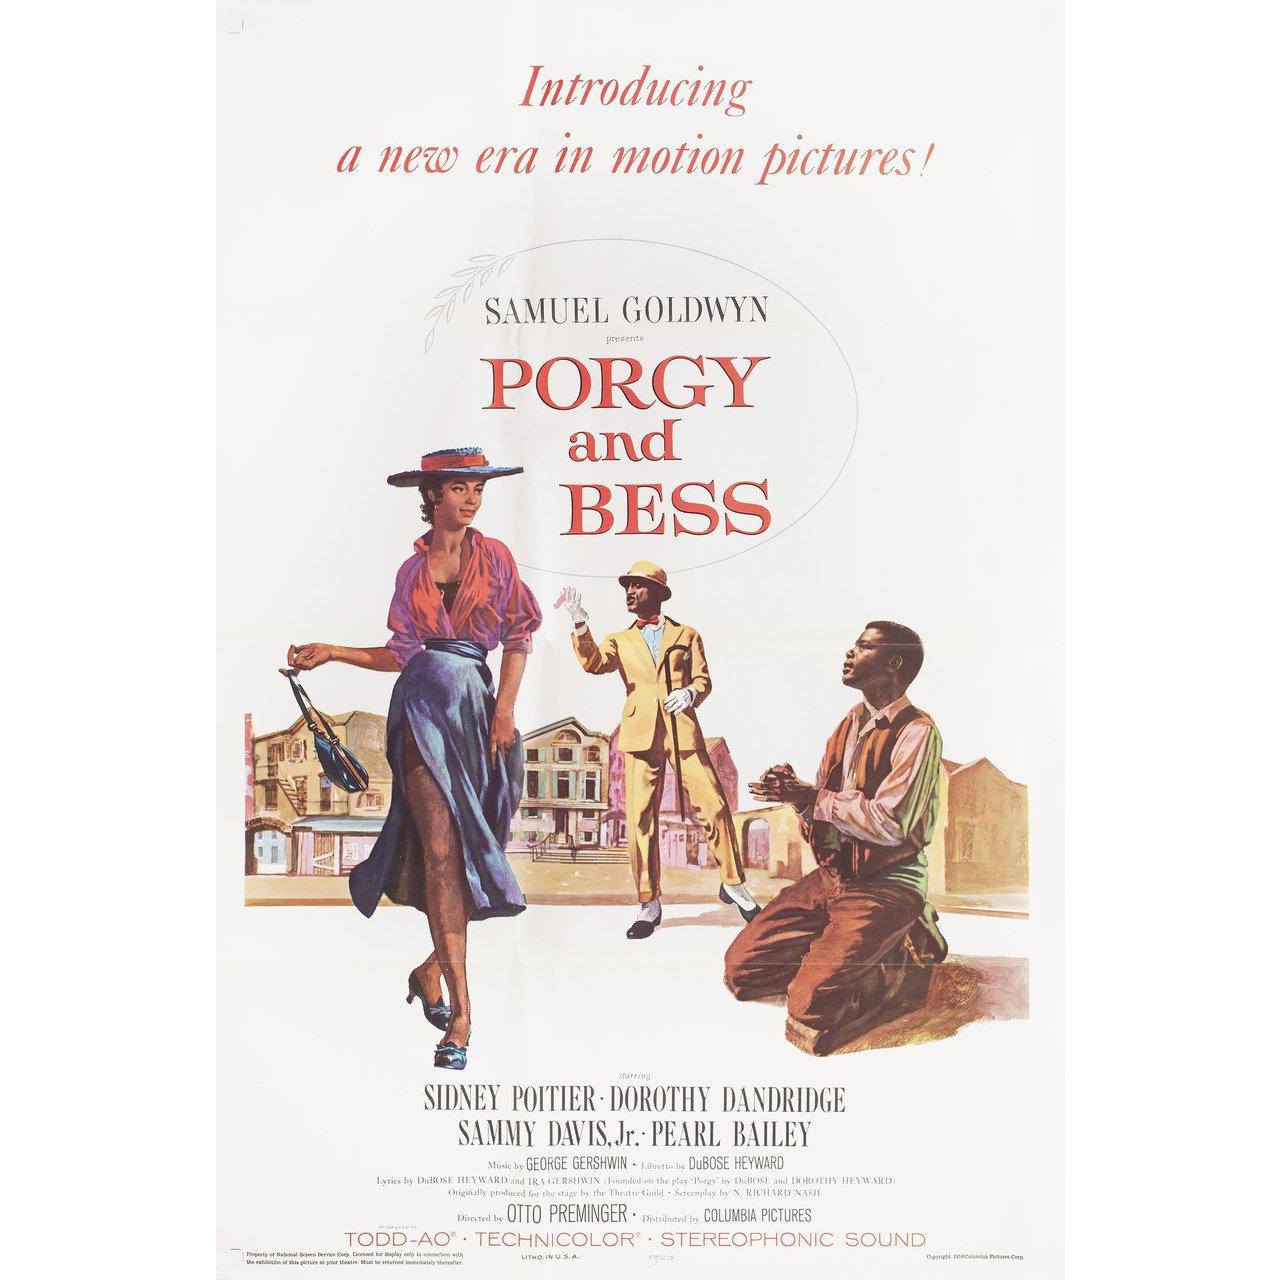 Original 1959 U.S. one sheet poster for the film Porgy and Bess directed by Otto Preminger / Rouben Mamoulian with Sidney Poitier / Dorothy Dandridge / Sammy Davis Jr. / Pearl Bailey. Fine condition, tri-fold. Many original posters were issued